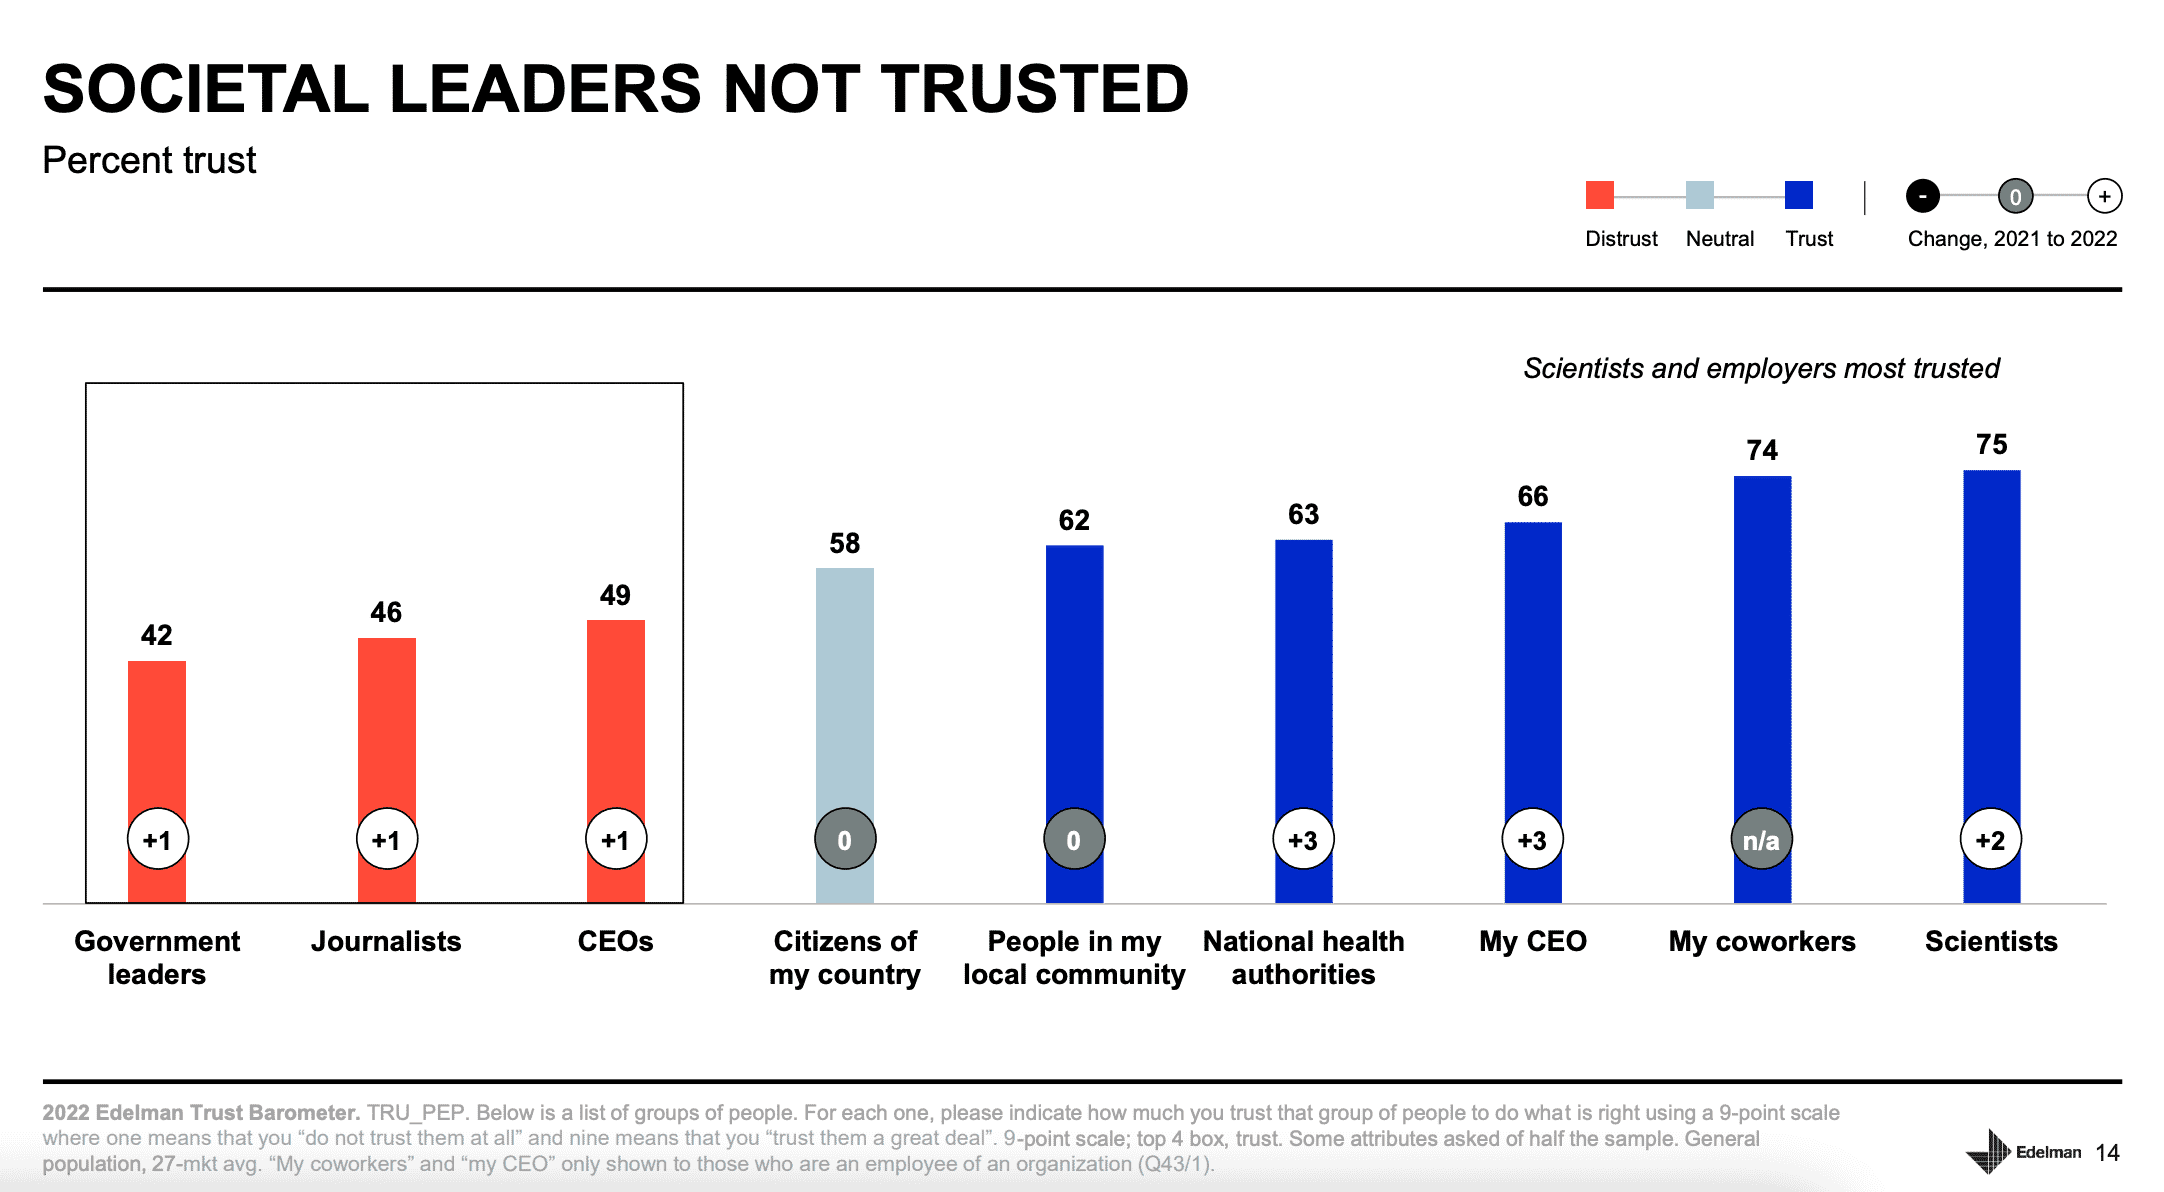 image showing societal leaders not trusted